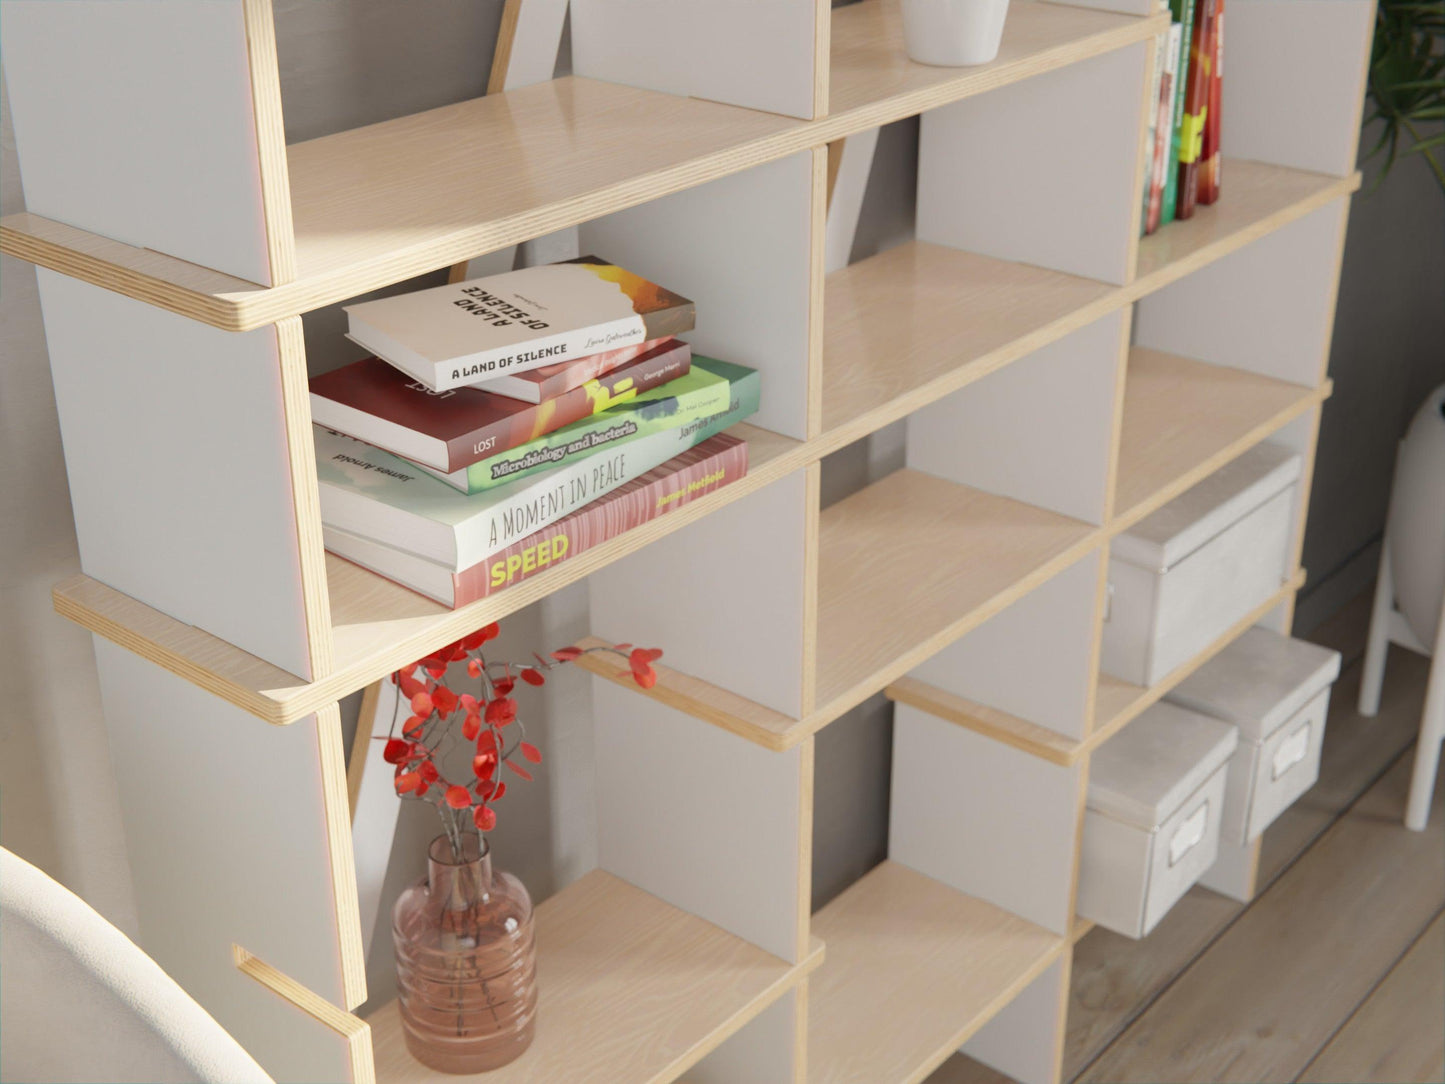 Explore our Modular Shelf Storage System. A plywood modular bookshelf perfect for your modern space.